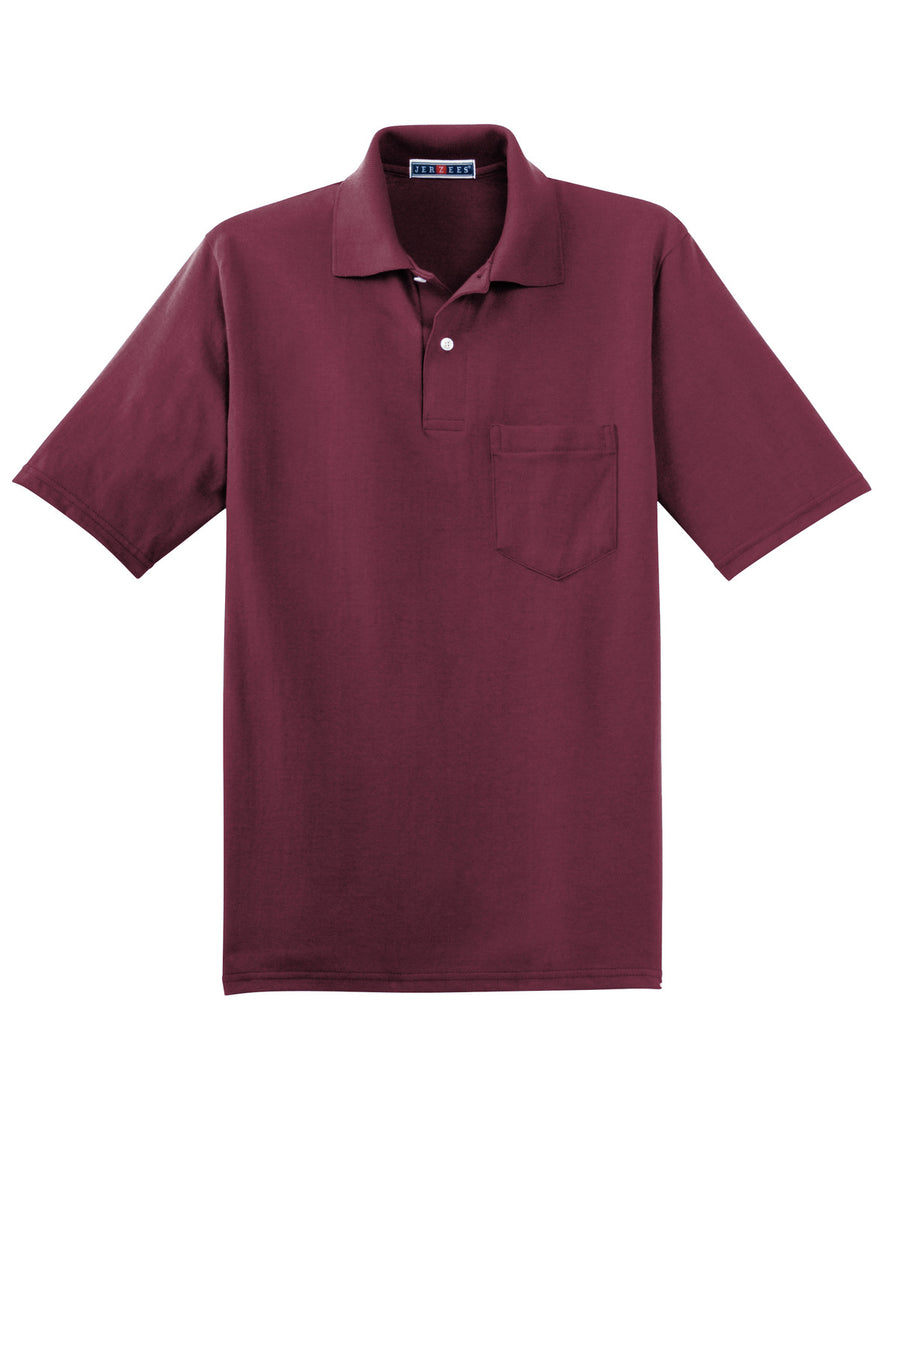 436MP-Maroon-front_flat